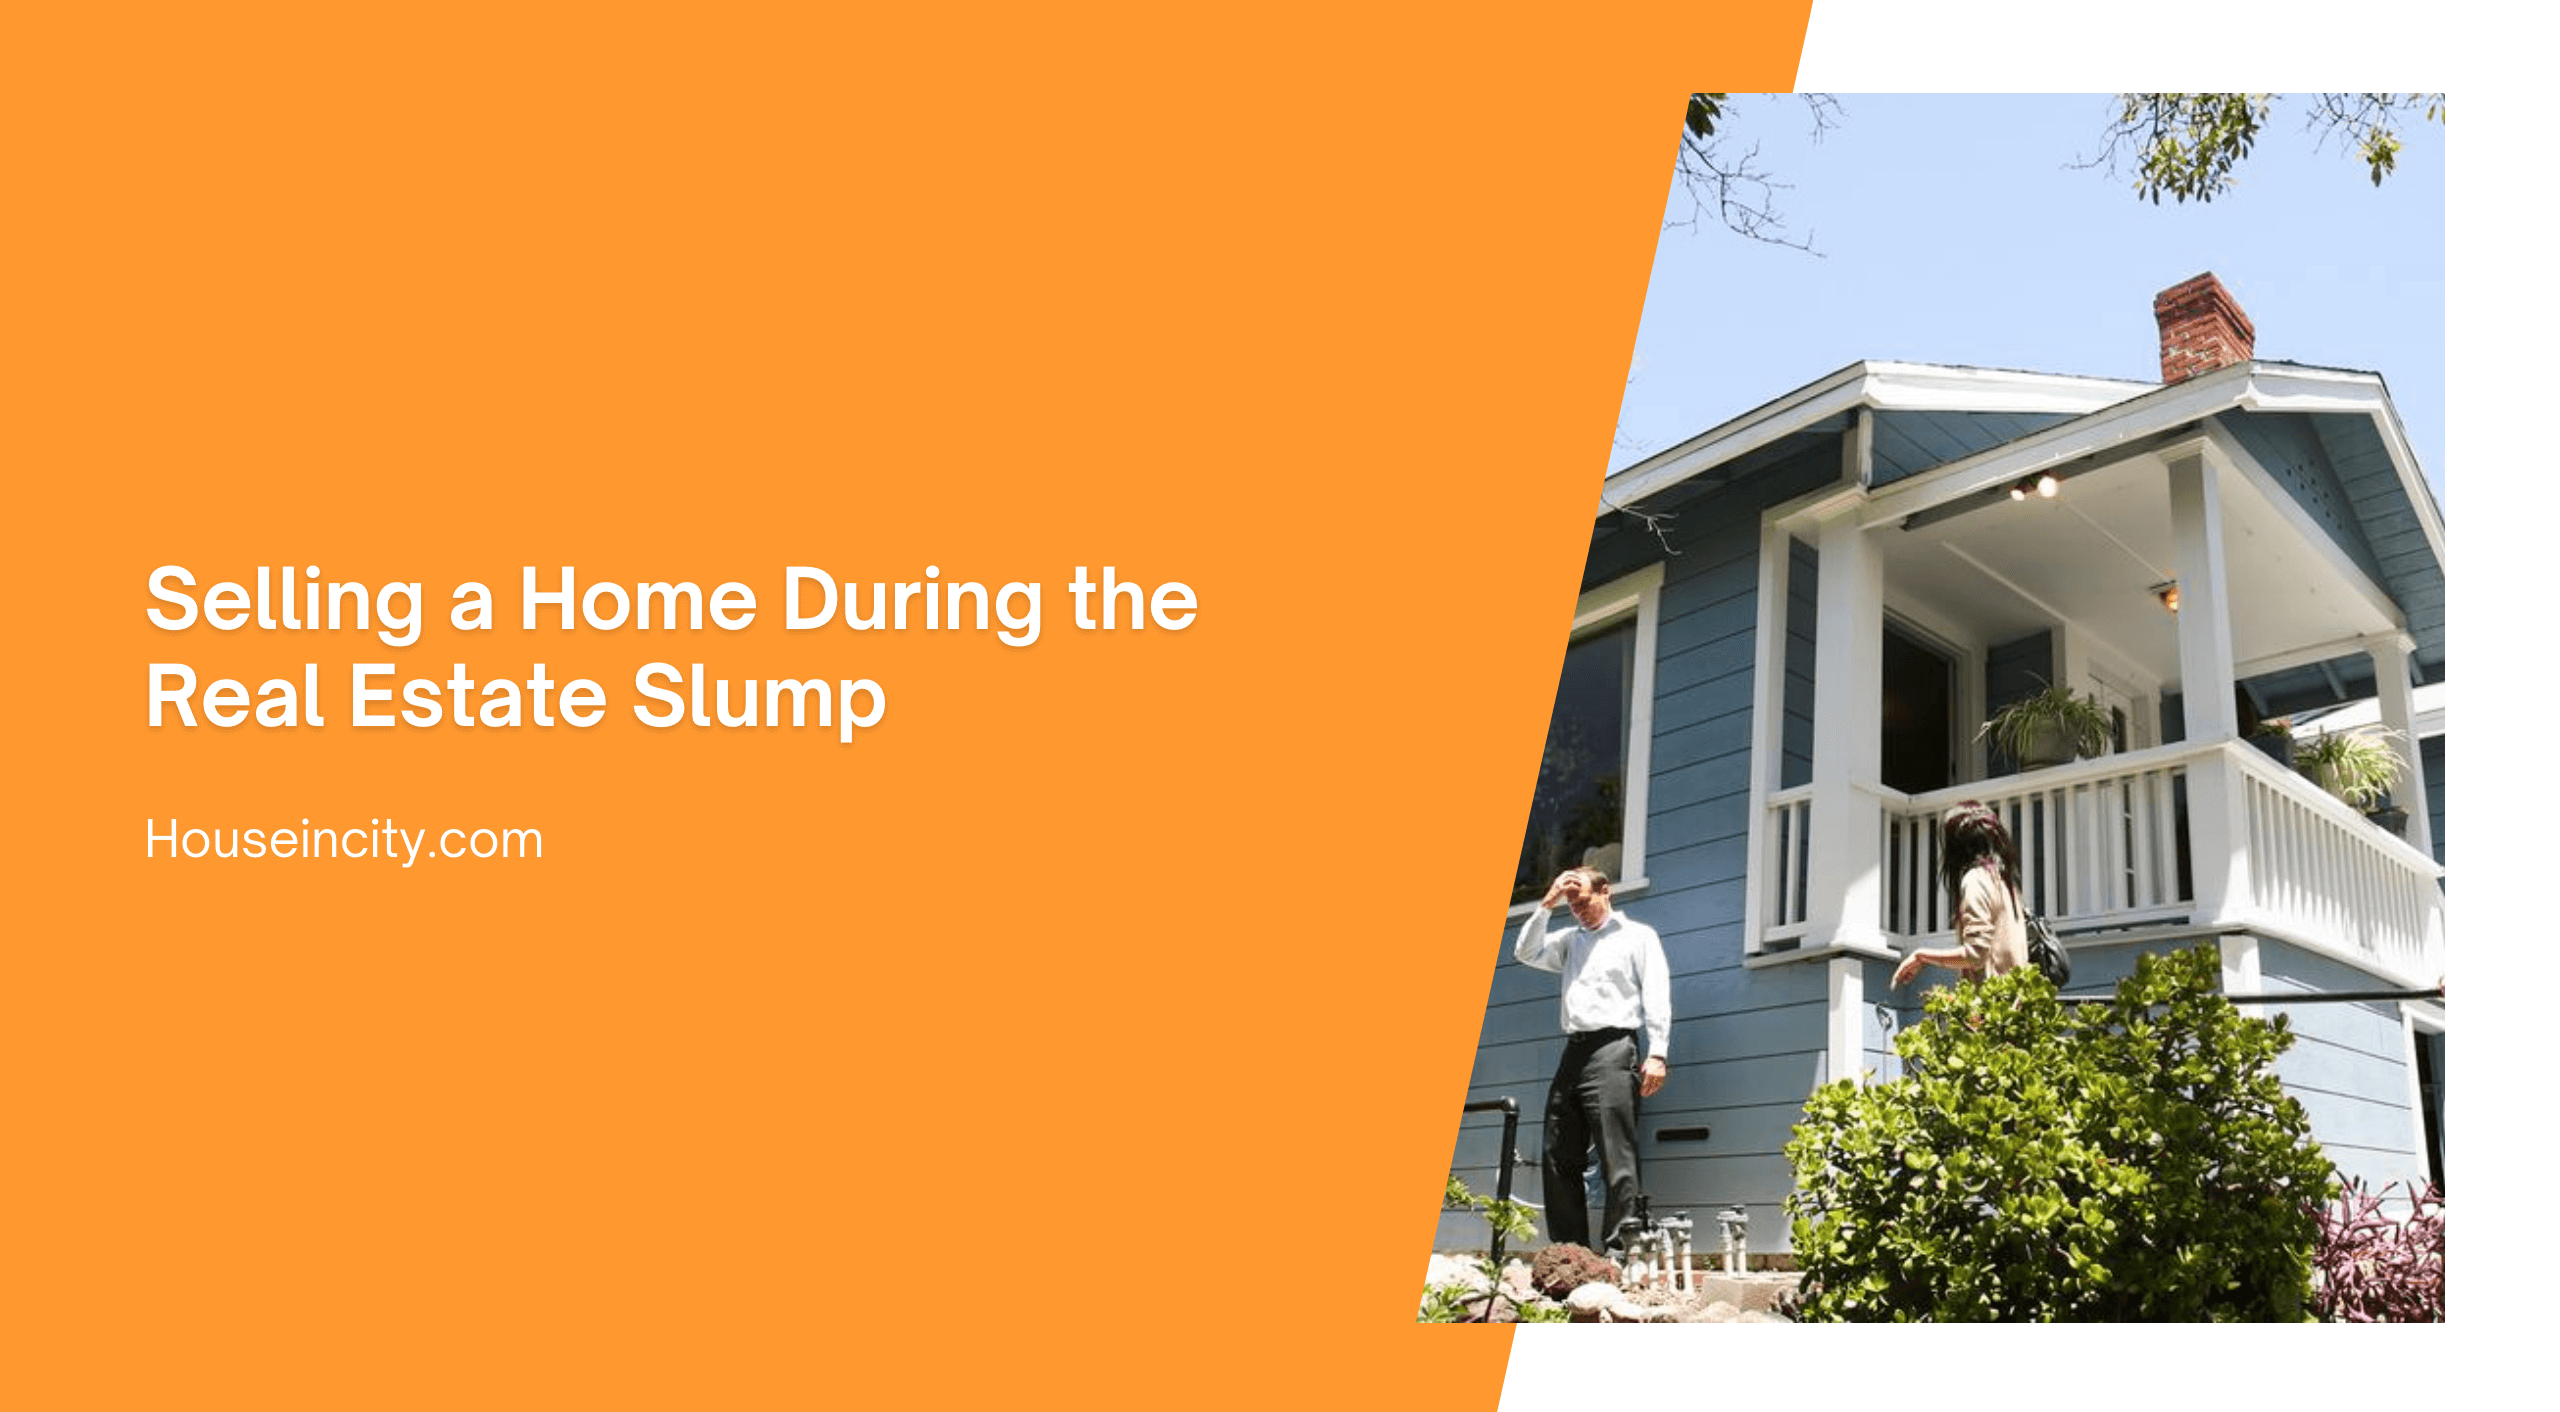 Selling a Home During the Real Estate Slump